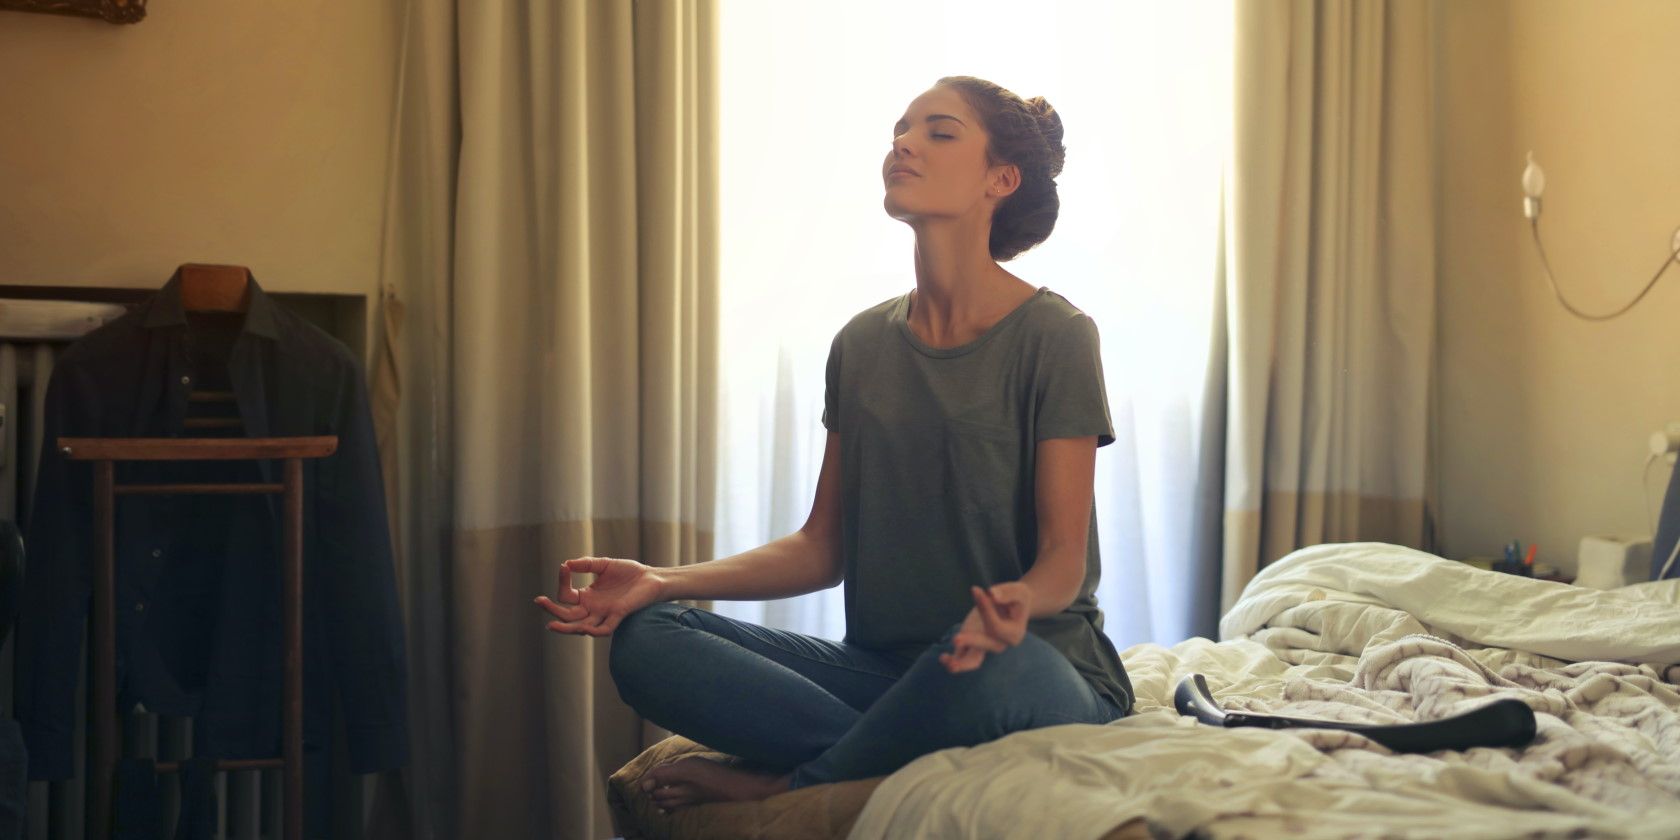 woman sitting on bed with closed eyes and meditating